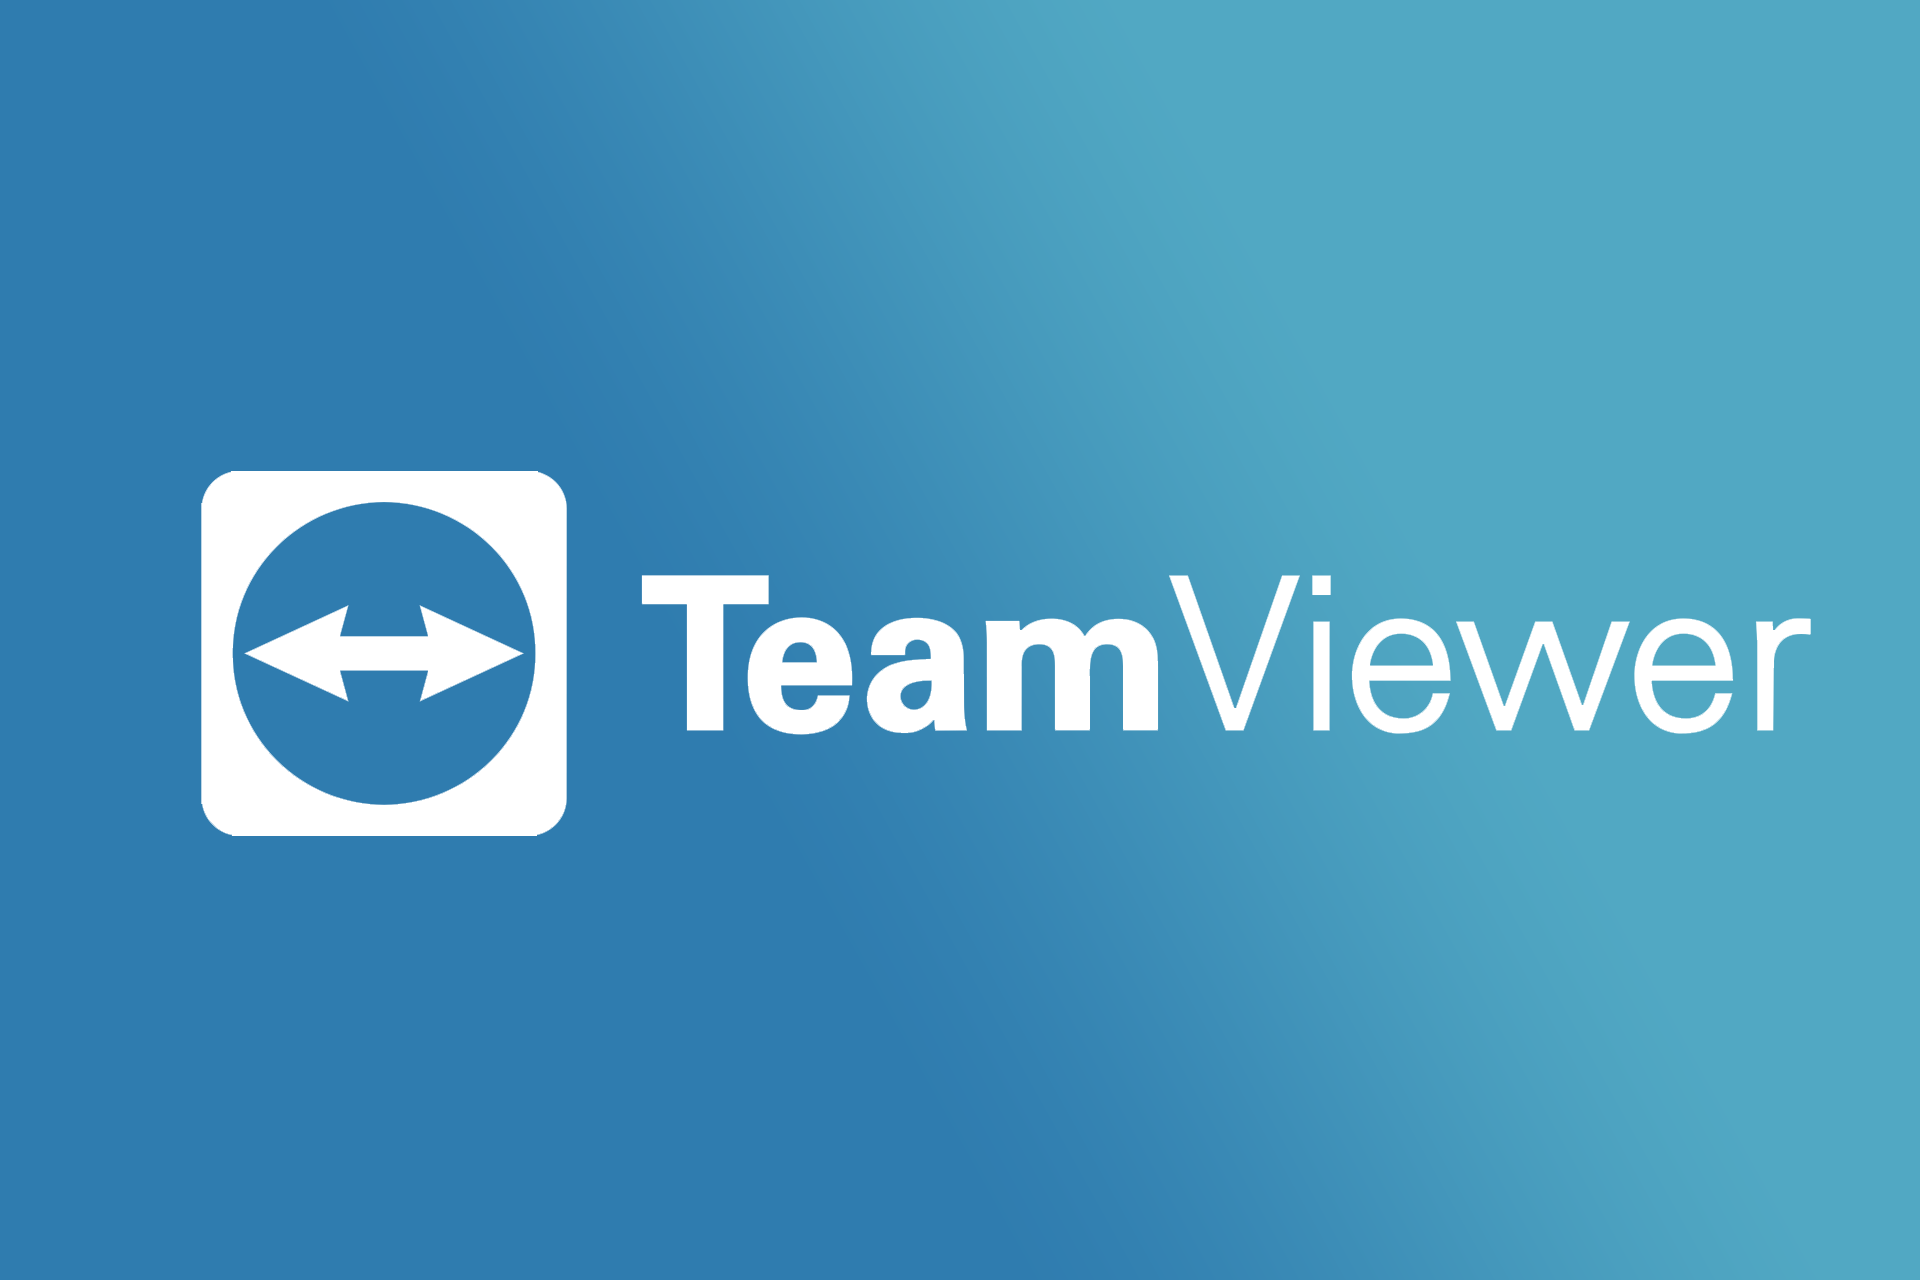 teamviewer free for commercial use